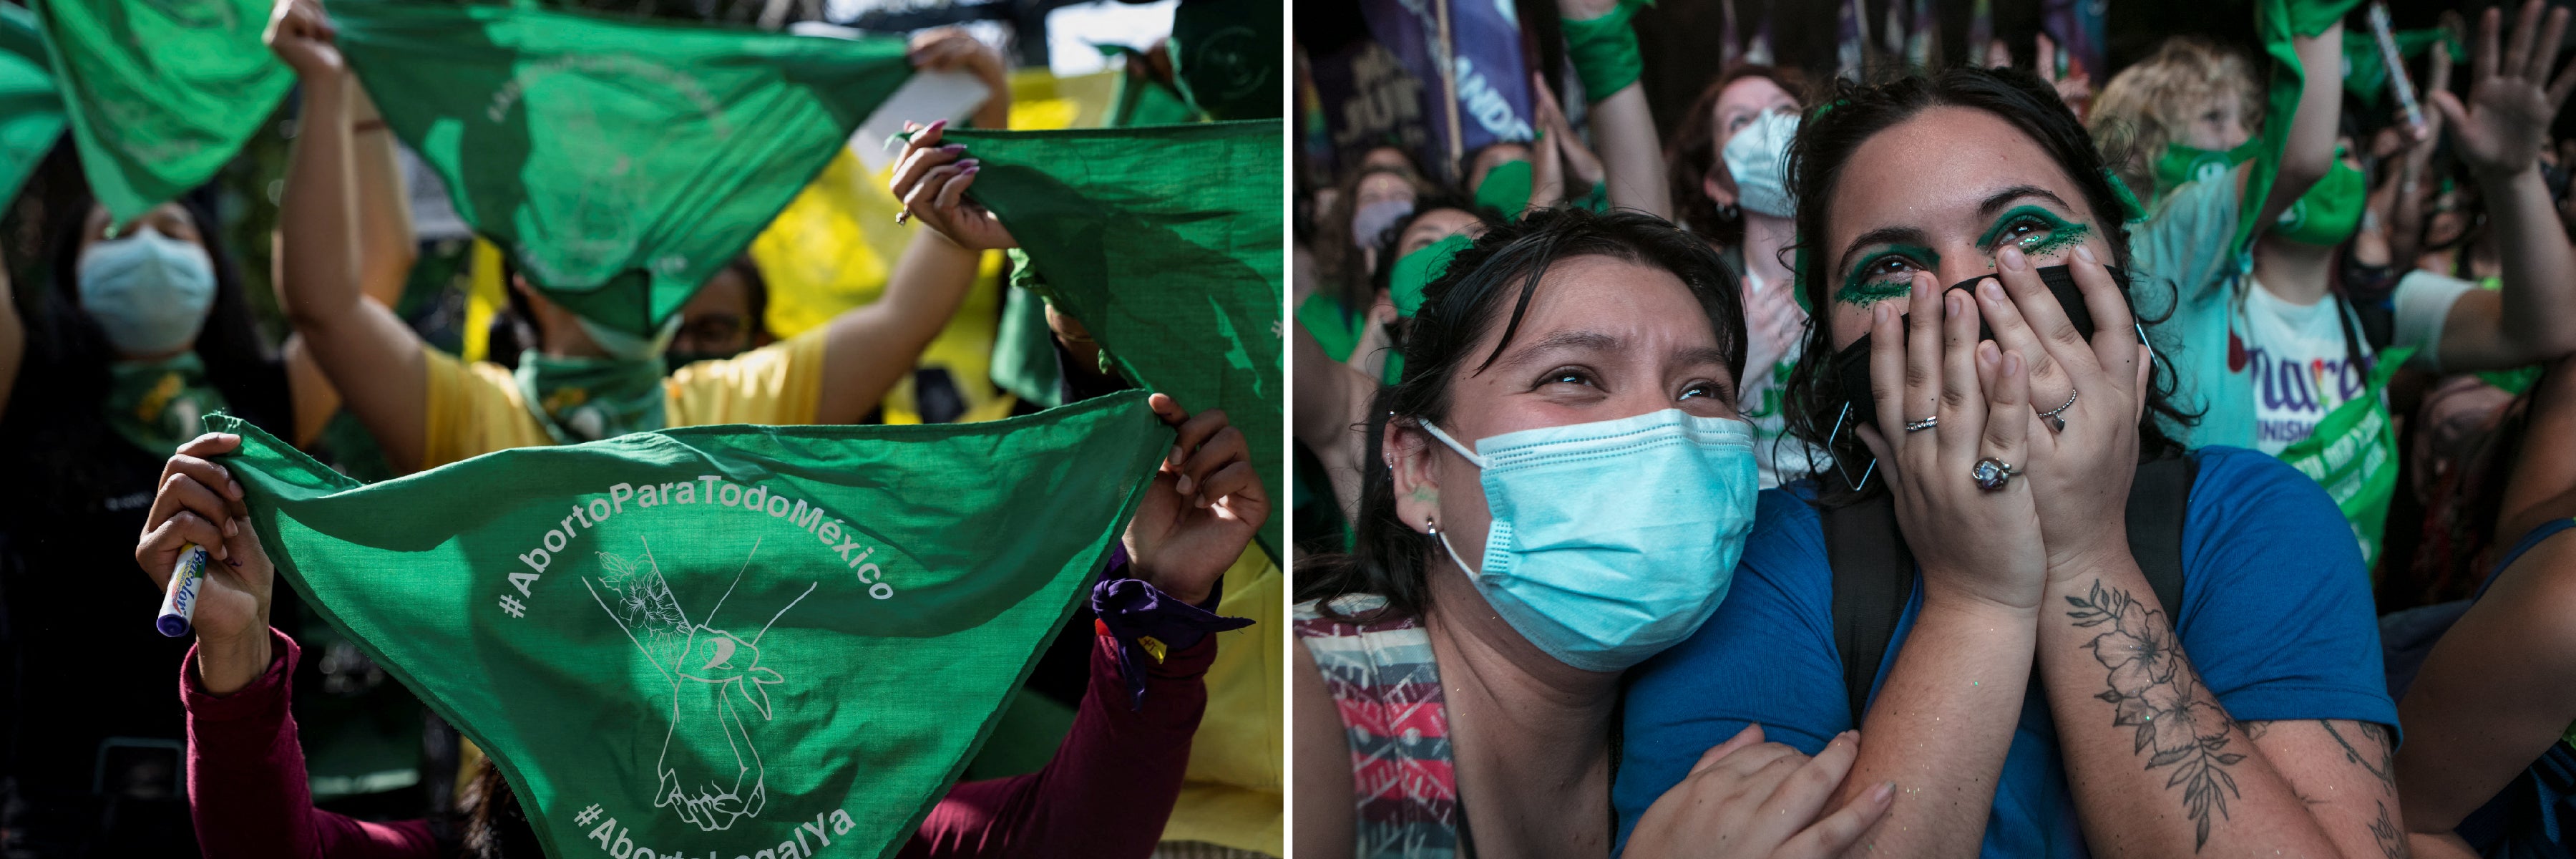 LEFT: An abortion-rights supporter holds up a green bandana reading “Abortion for all Mexico” during a protest outside the US Embassy in Mexico City, supporting abortion rights, June 29, 2022. © 2022 Toya Sarno Jordan/Reuters RIGHT: Pro-choice demonstrators celebrate while Argentina’s Congress debated a bill to legalize abortion,December 29, 2020, in Buenos Aires. Congress approved the bill on December 30, 2020. © 2020 Ricardo Ceppi/Getty Images